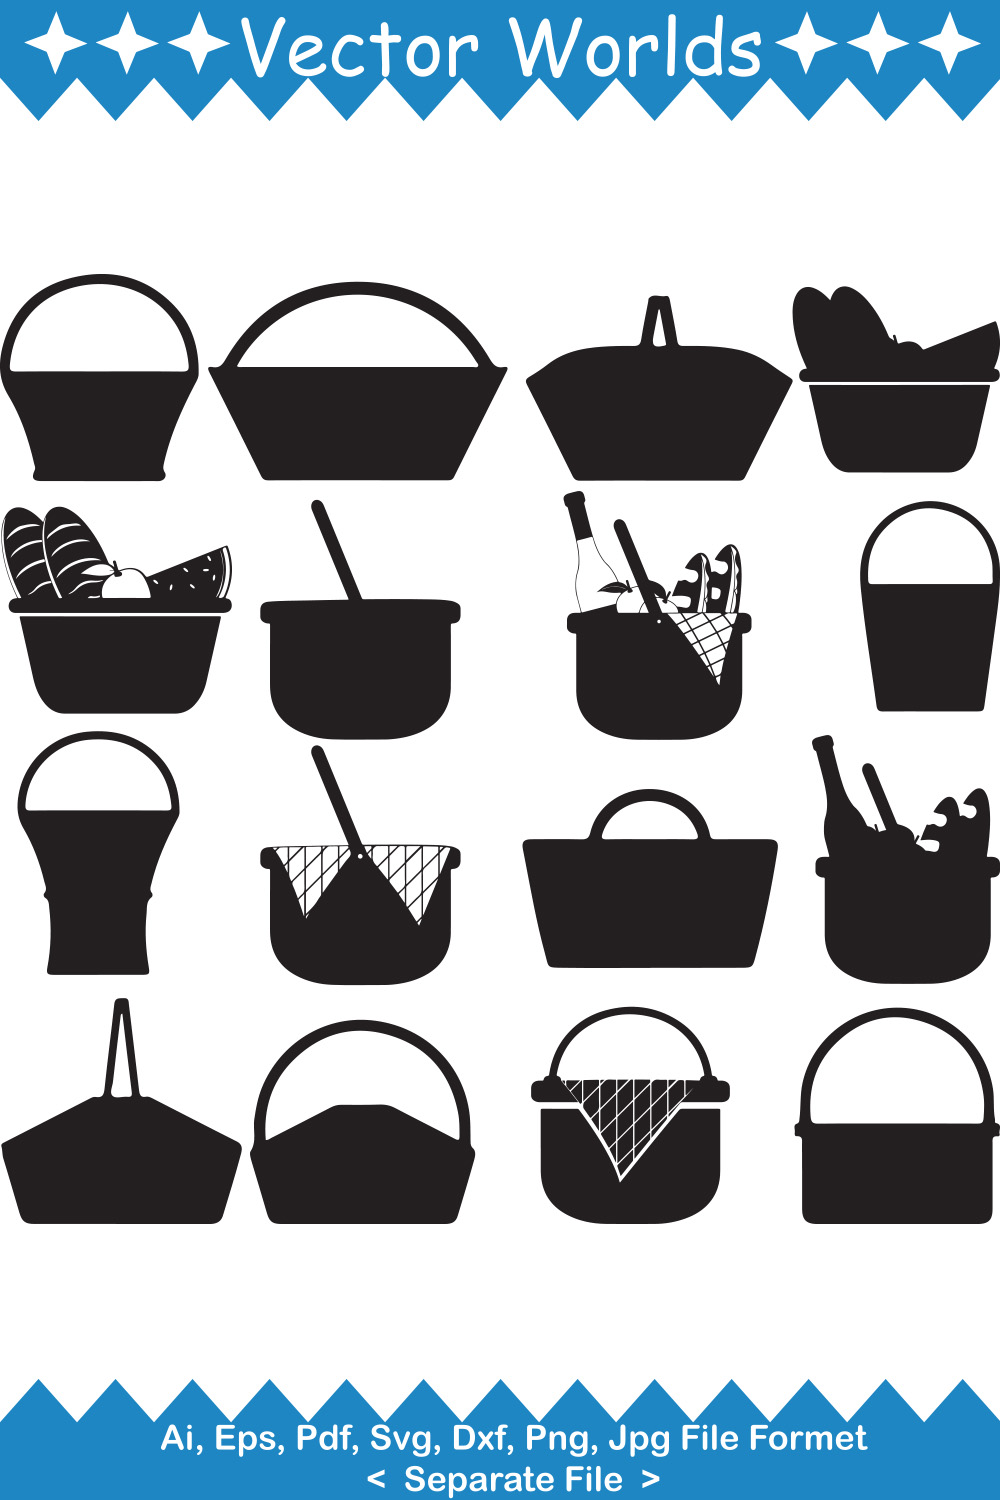 Collection of vector exquisite images of silhouettes of picnic baskets.